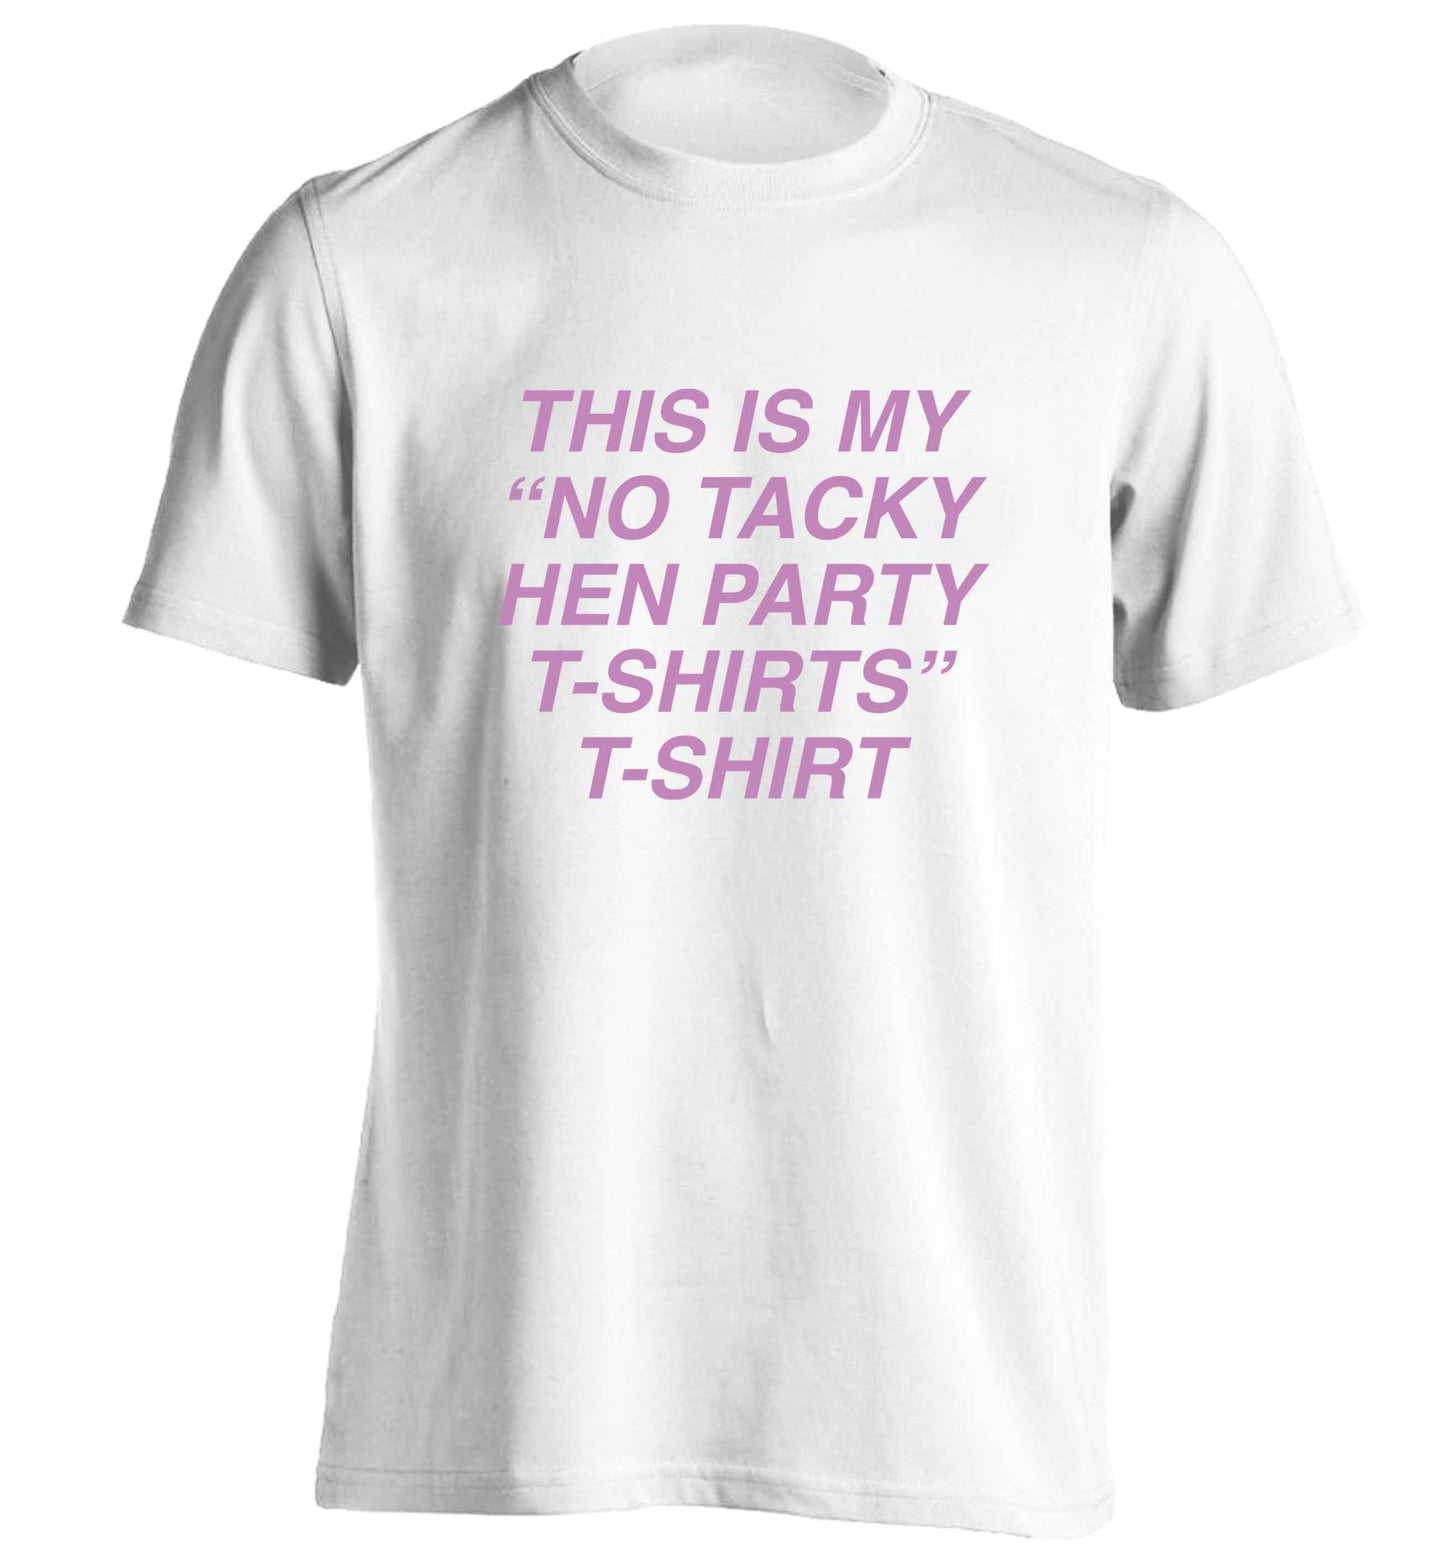 This is my 'no tacky hen party T-Shirt'  adults unisex white Tshirt 2XL